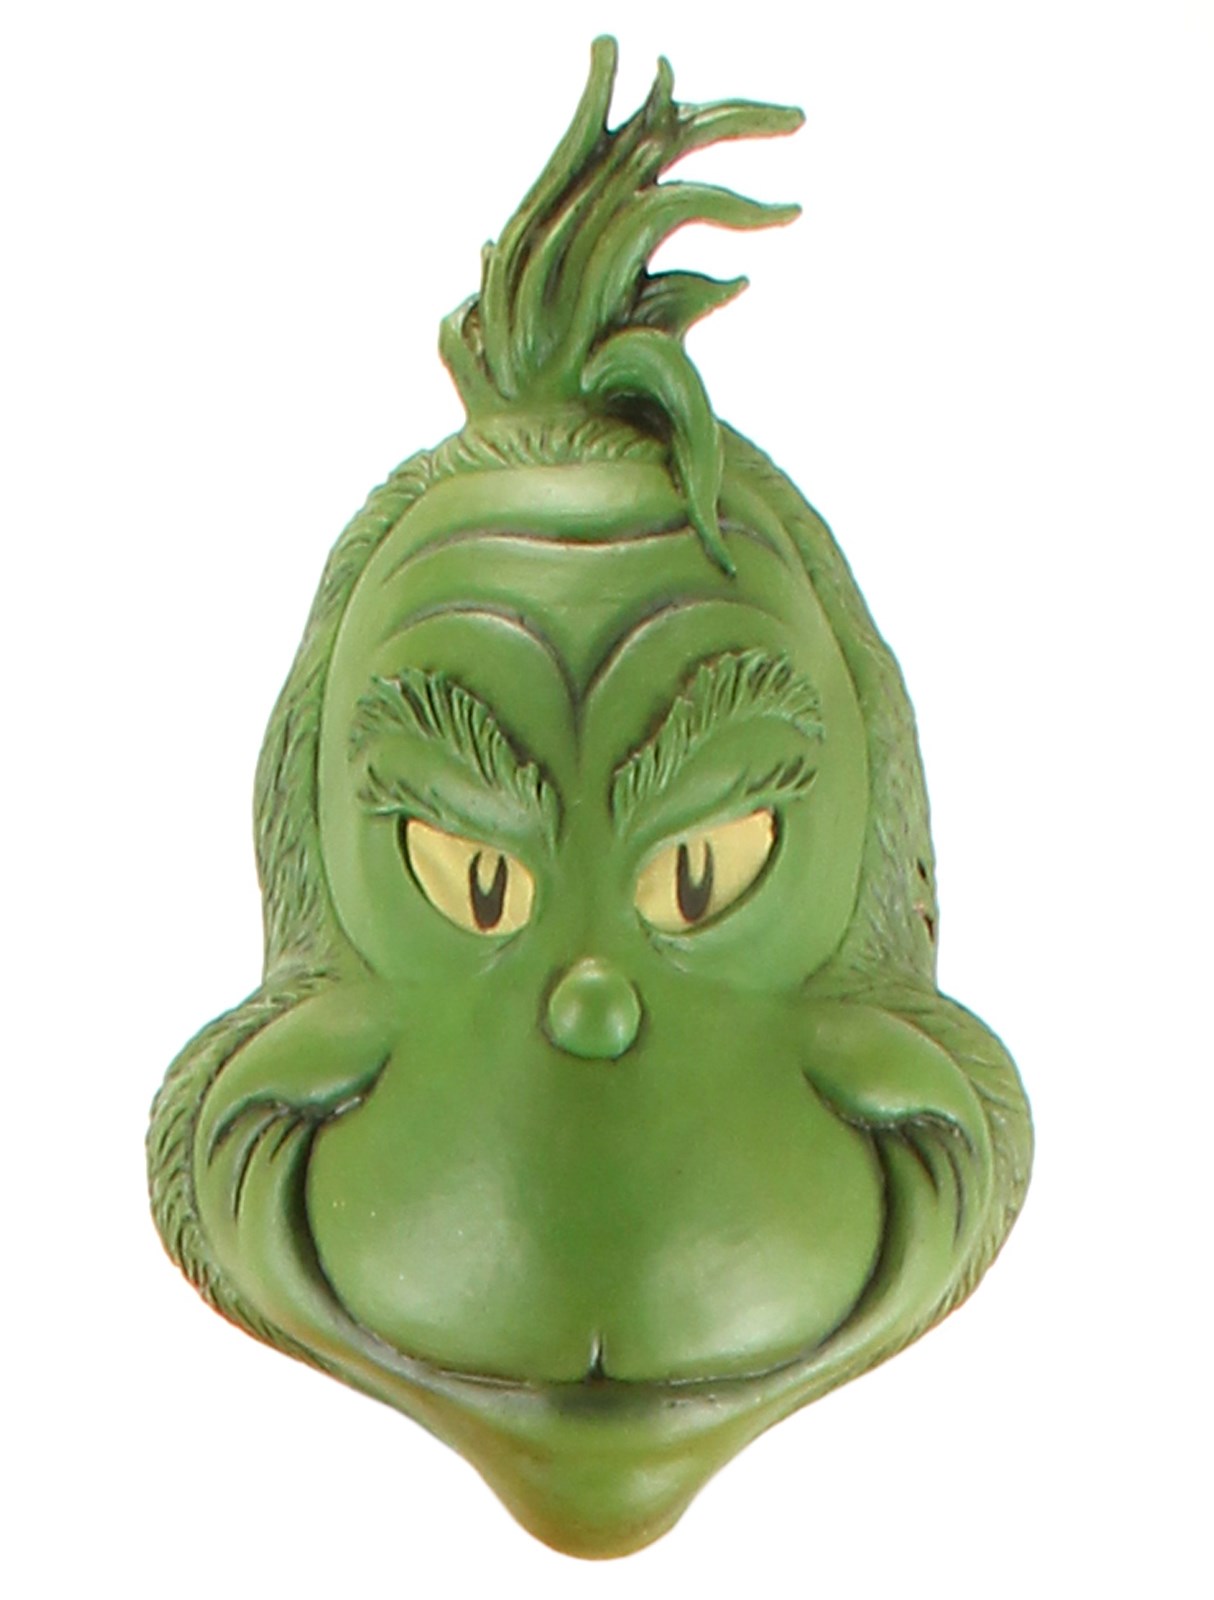 How the Grinch Stole Christmas! - The Grinch Latex Mask Adult